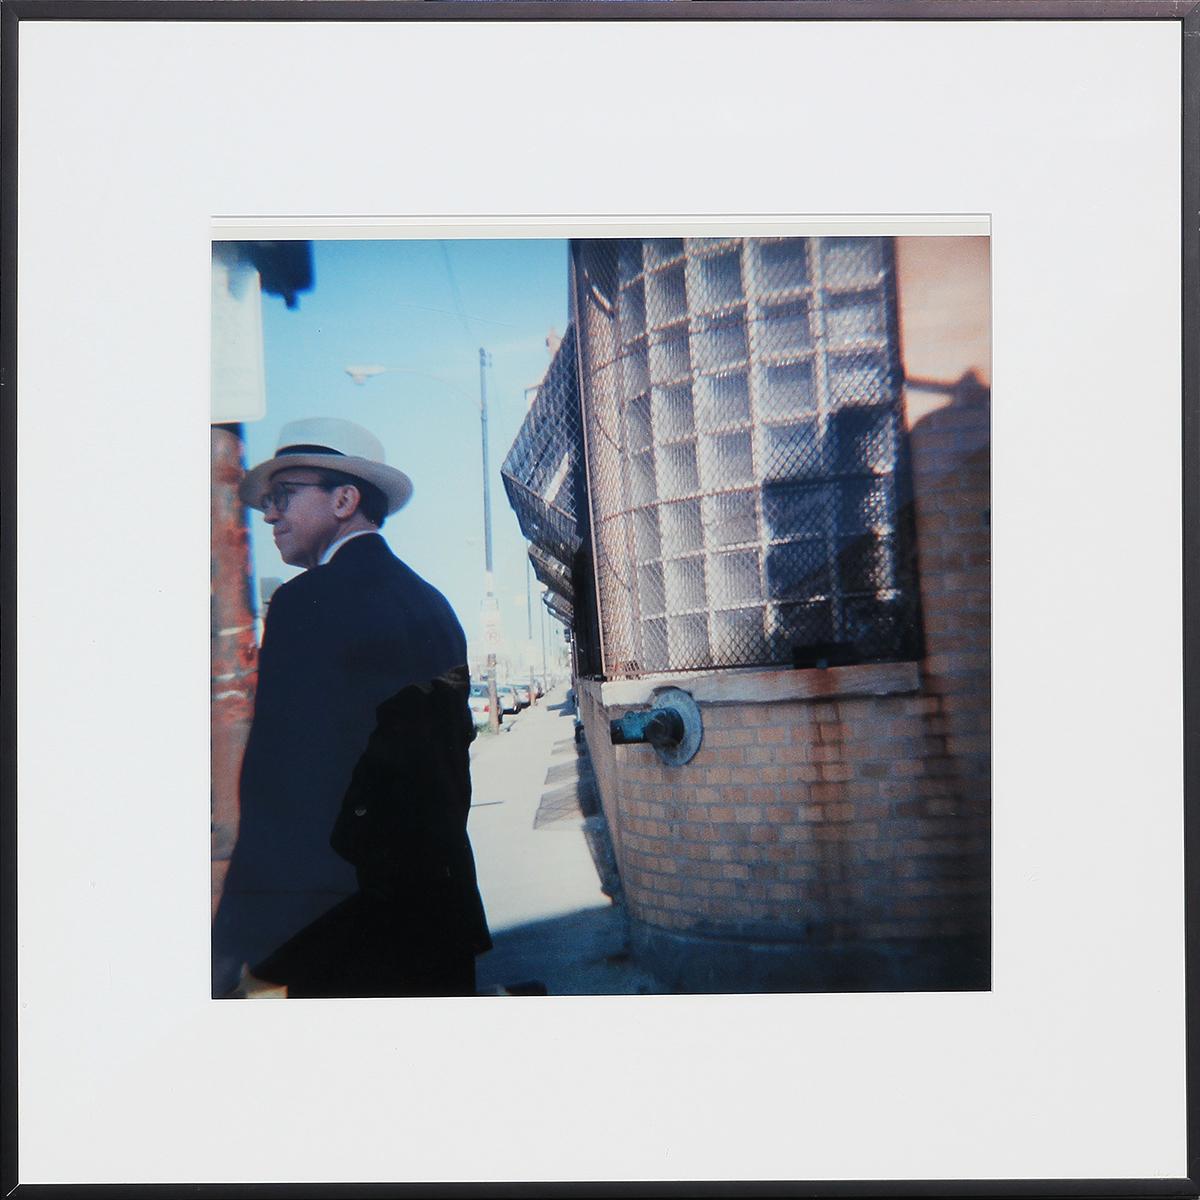 Amy Blakemore Color Photograph - "Man" Modern C-Print Photograph of a Man in a Suit and Fedora Edition 1/20